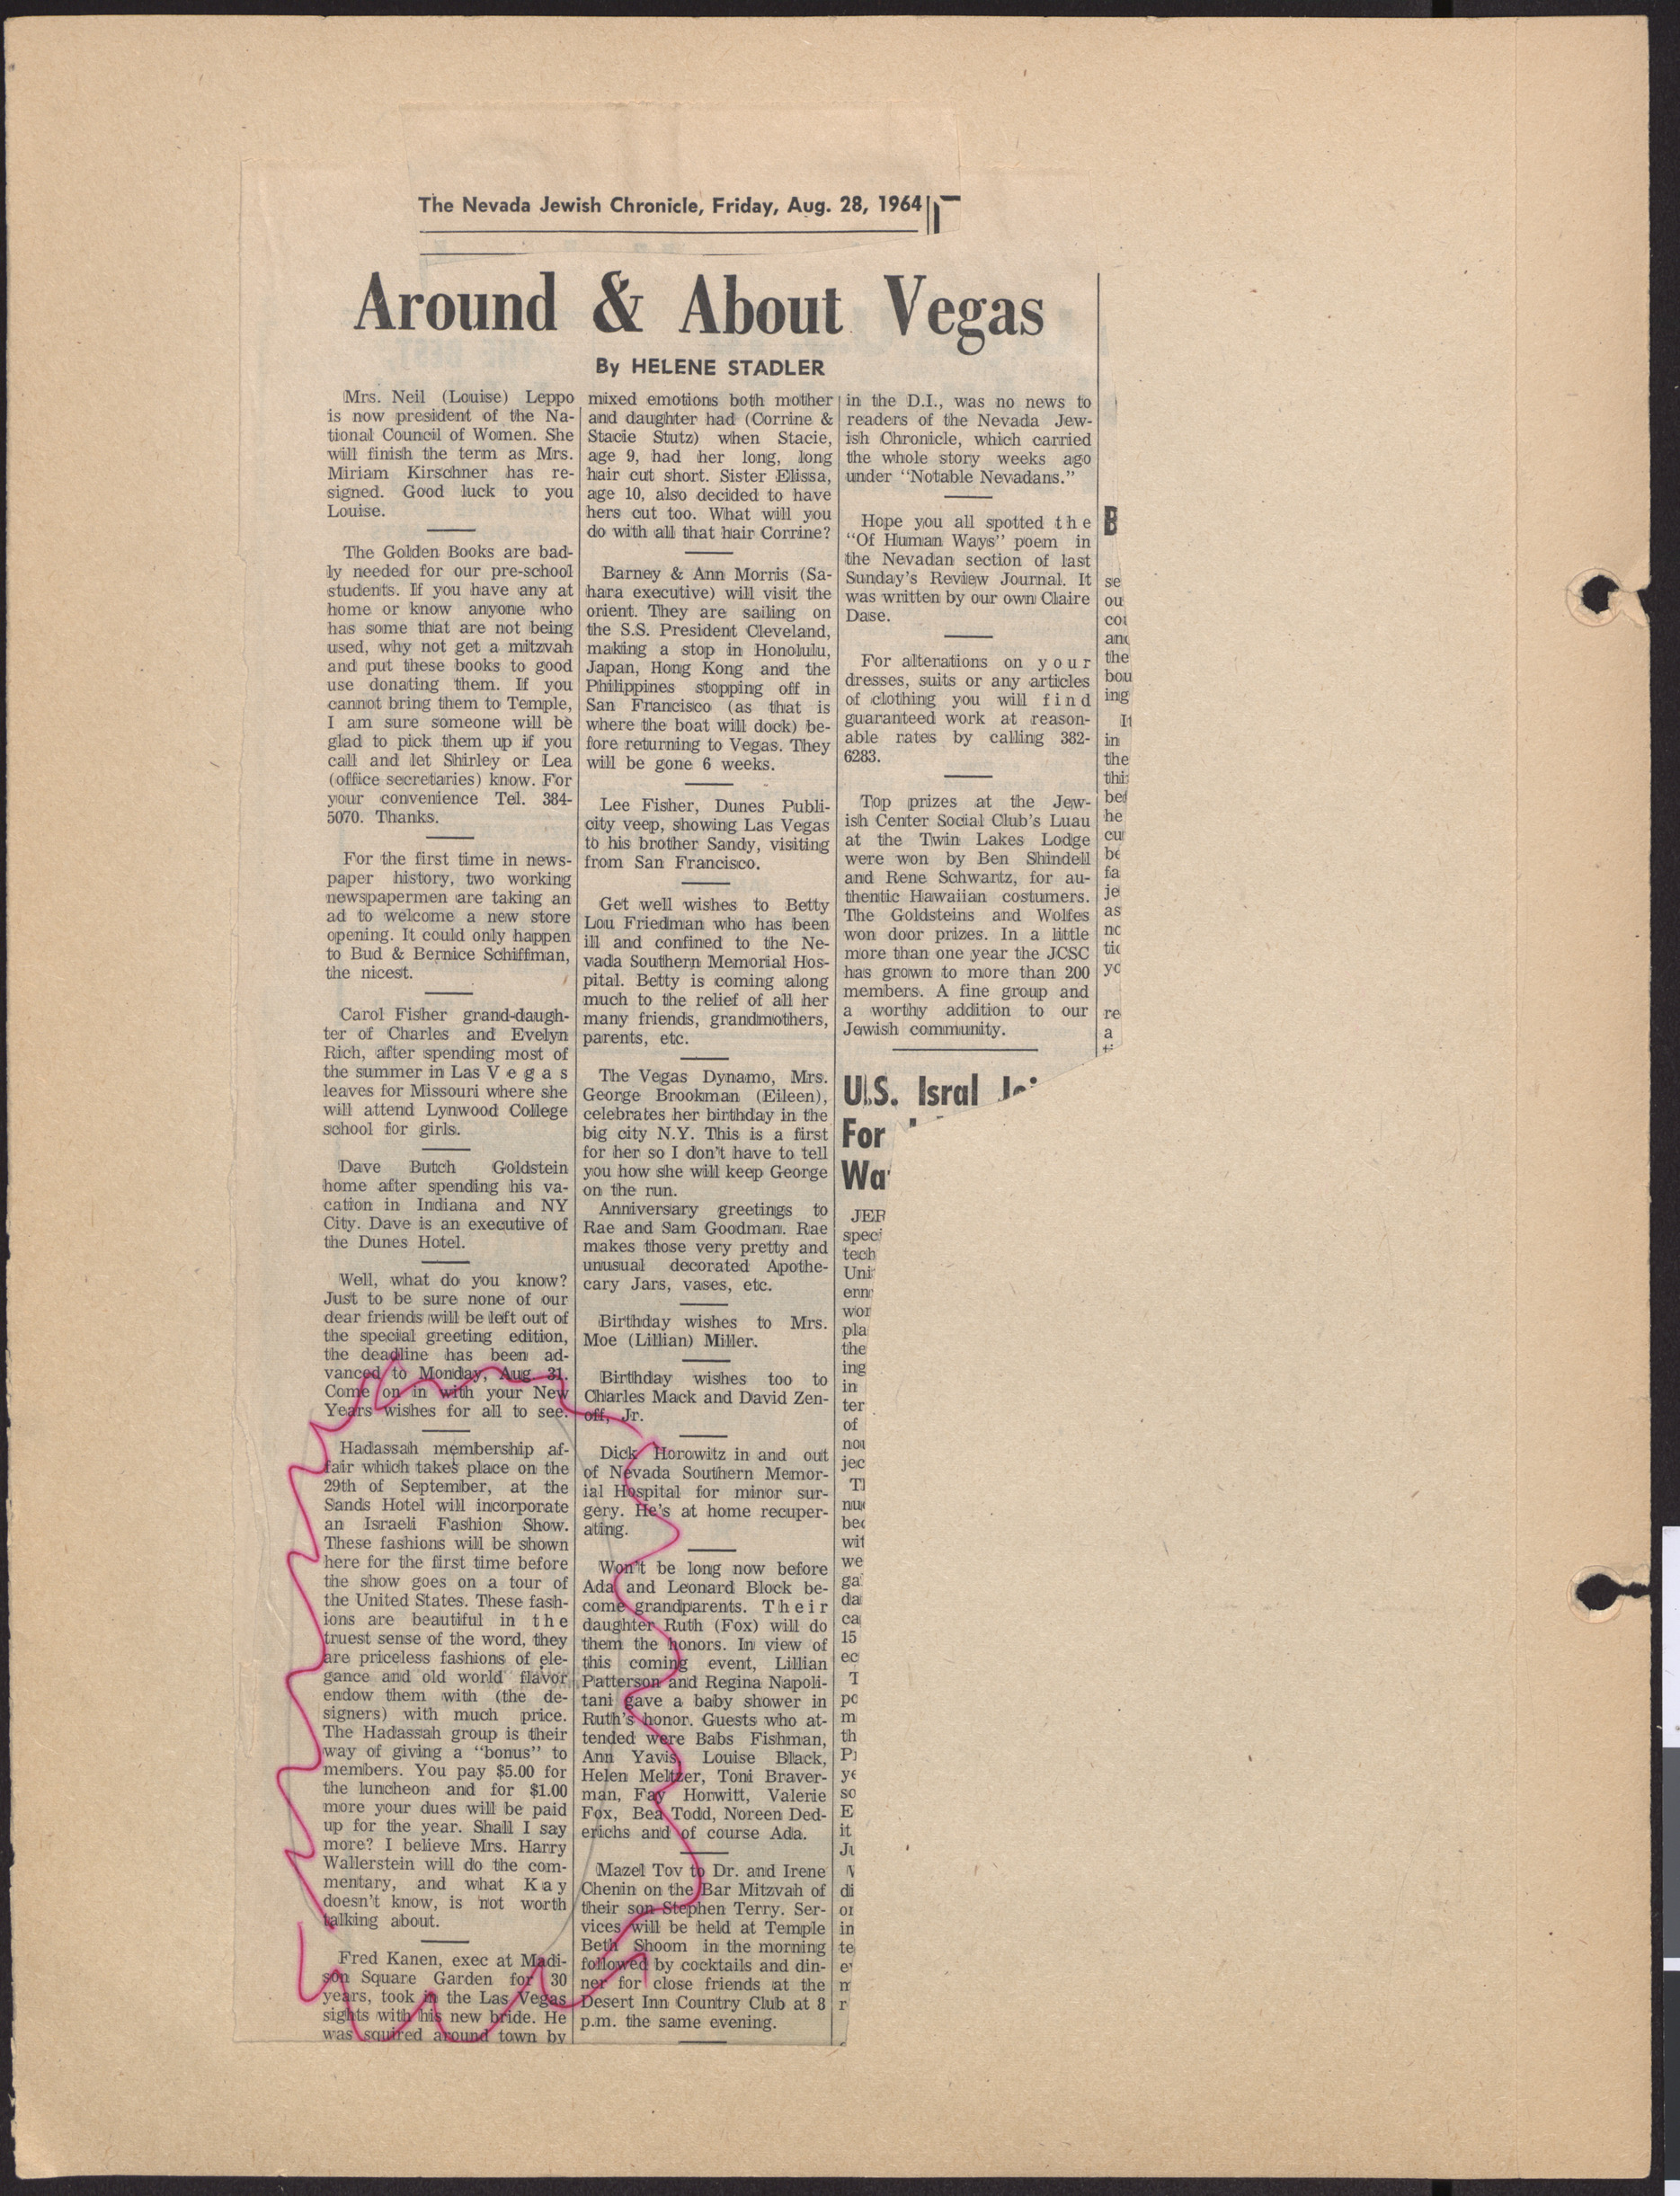 Newspaper clipping, Around & About Vegas, The Nevada Jewish Chronicle, August 28, 1964